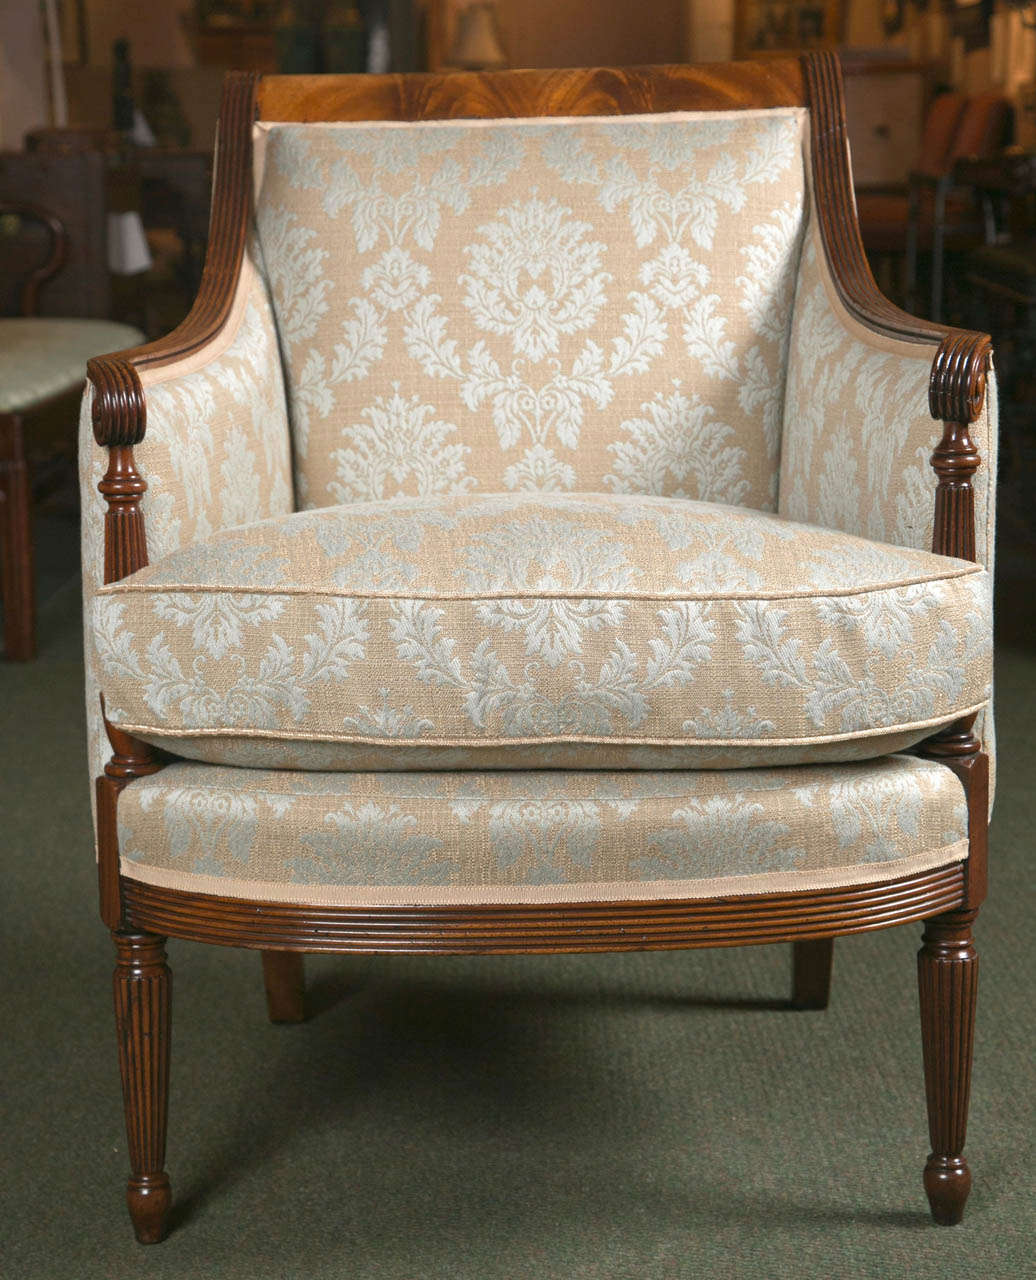 A newly upholstered English mahogany tub chair in excellent condition.